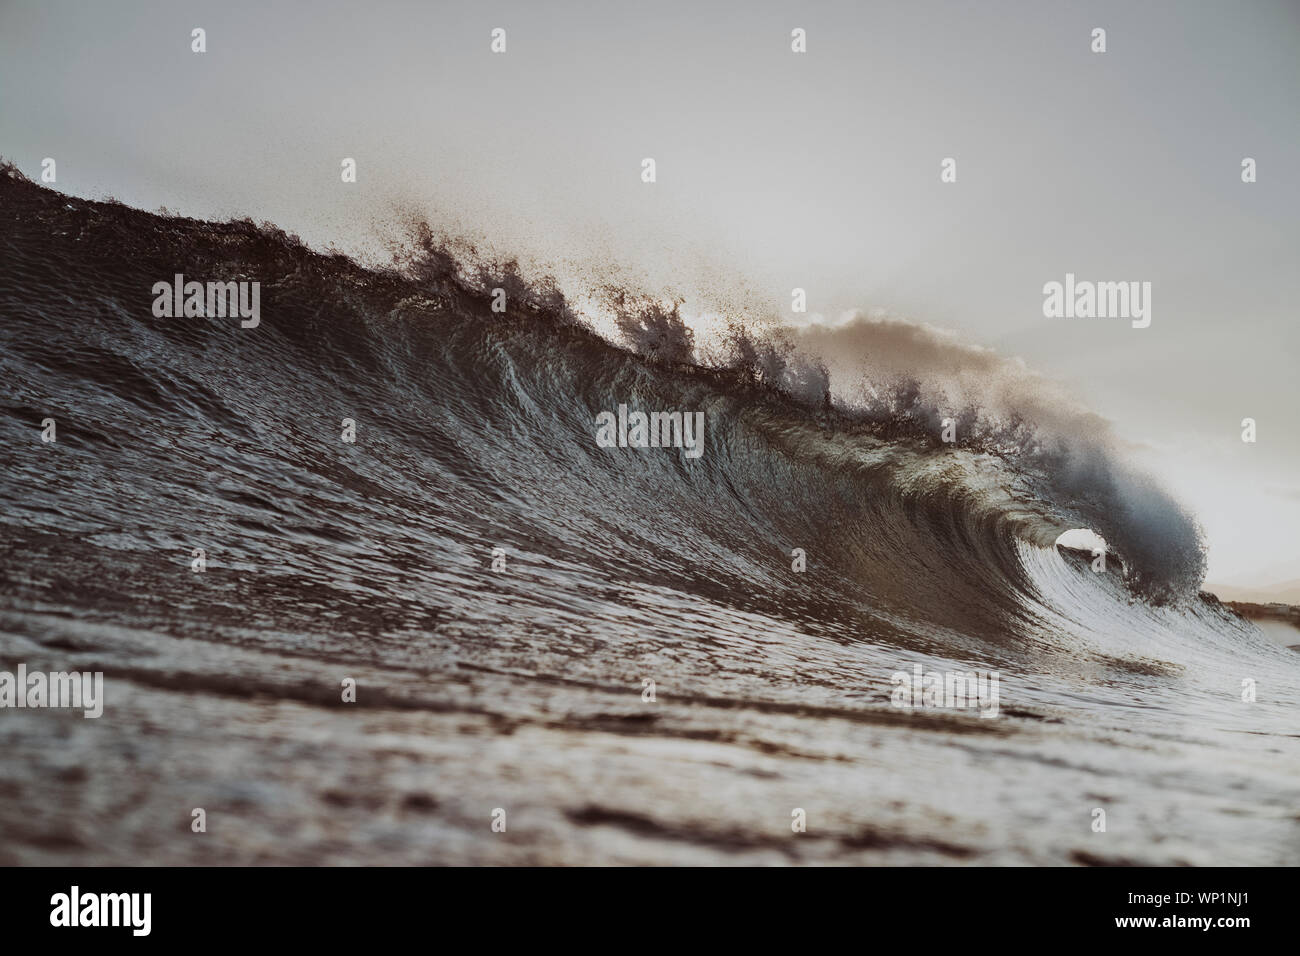 Moody scene of a wave breaking at dusk Stock Photo